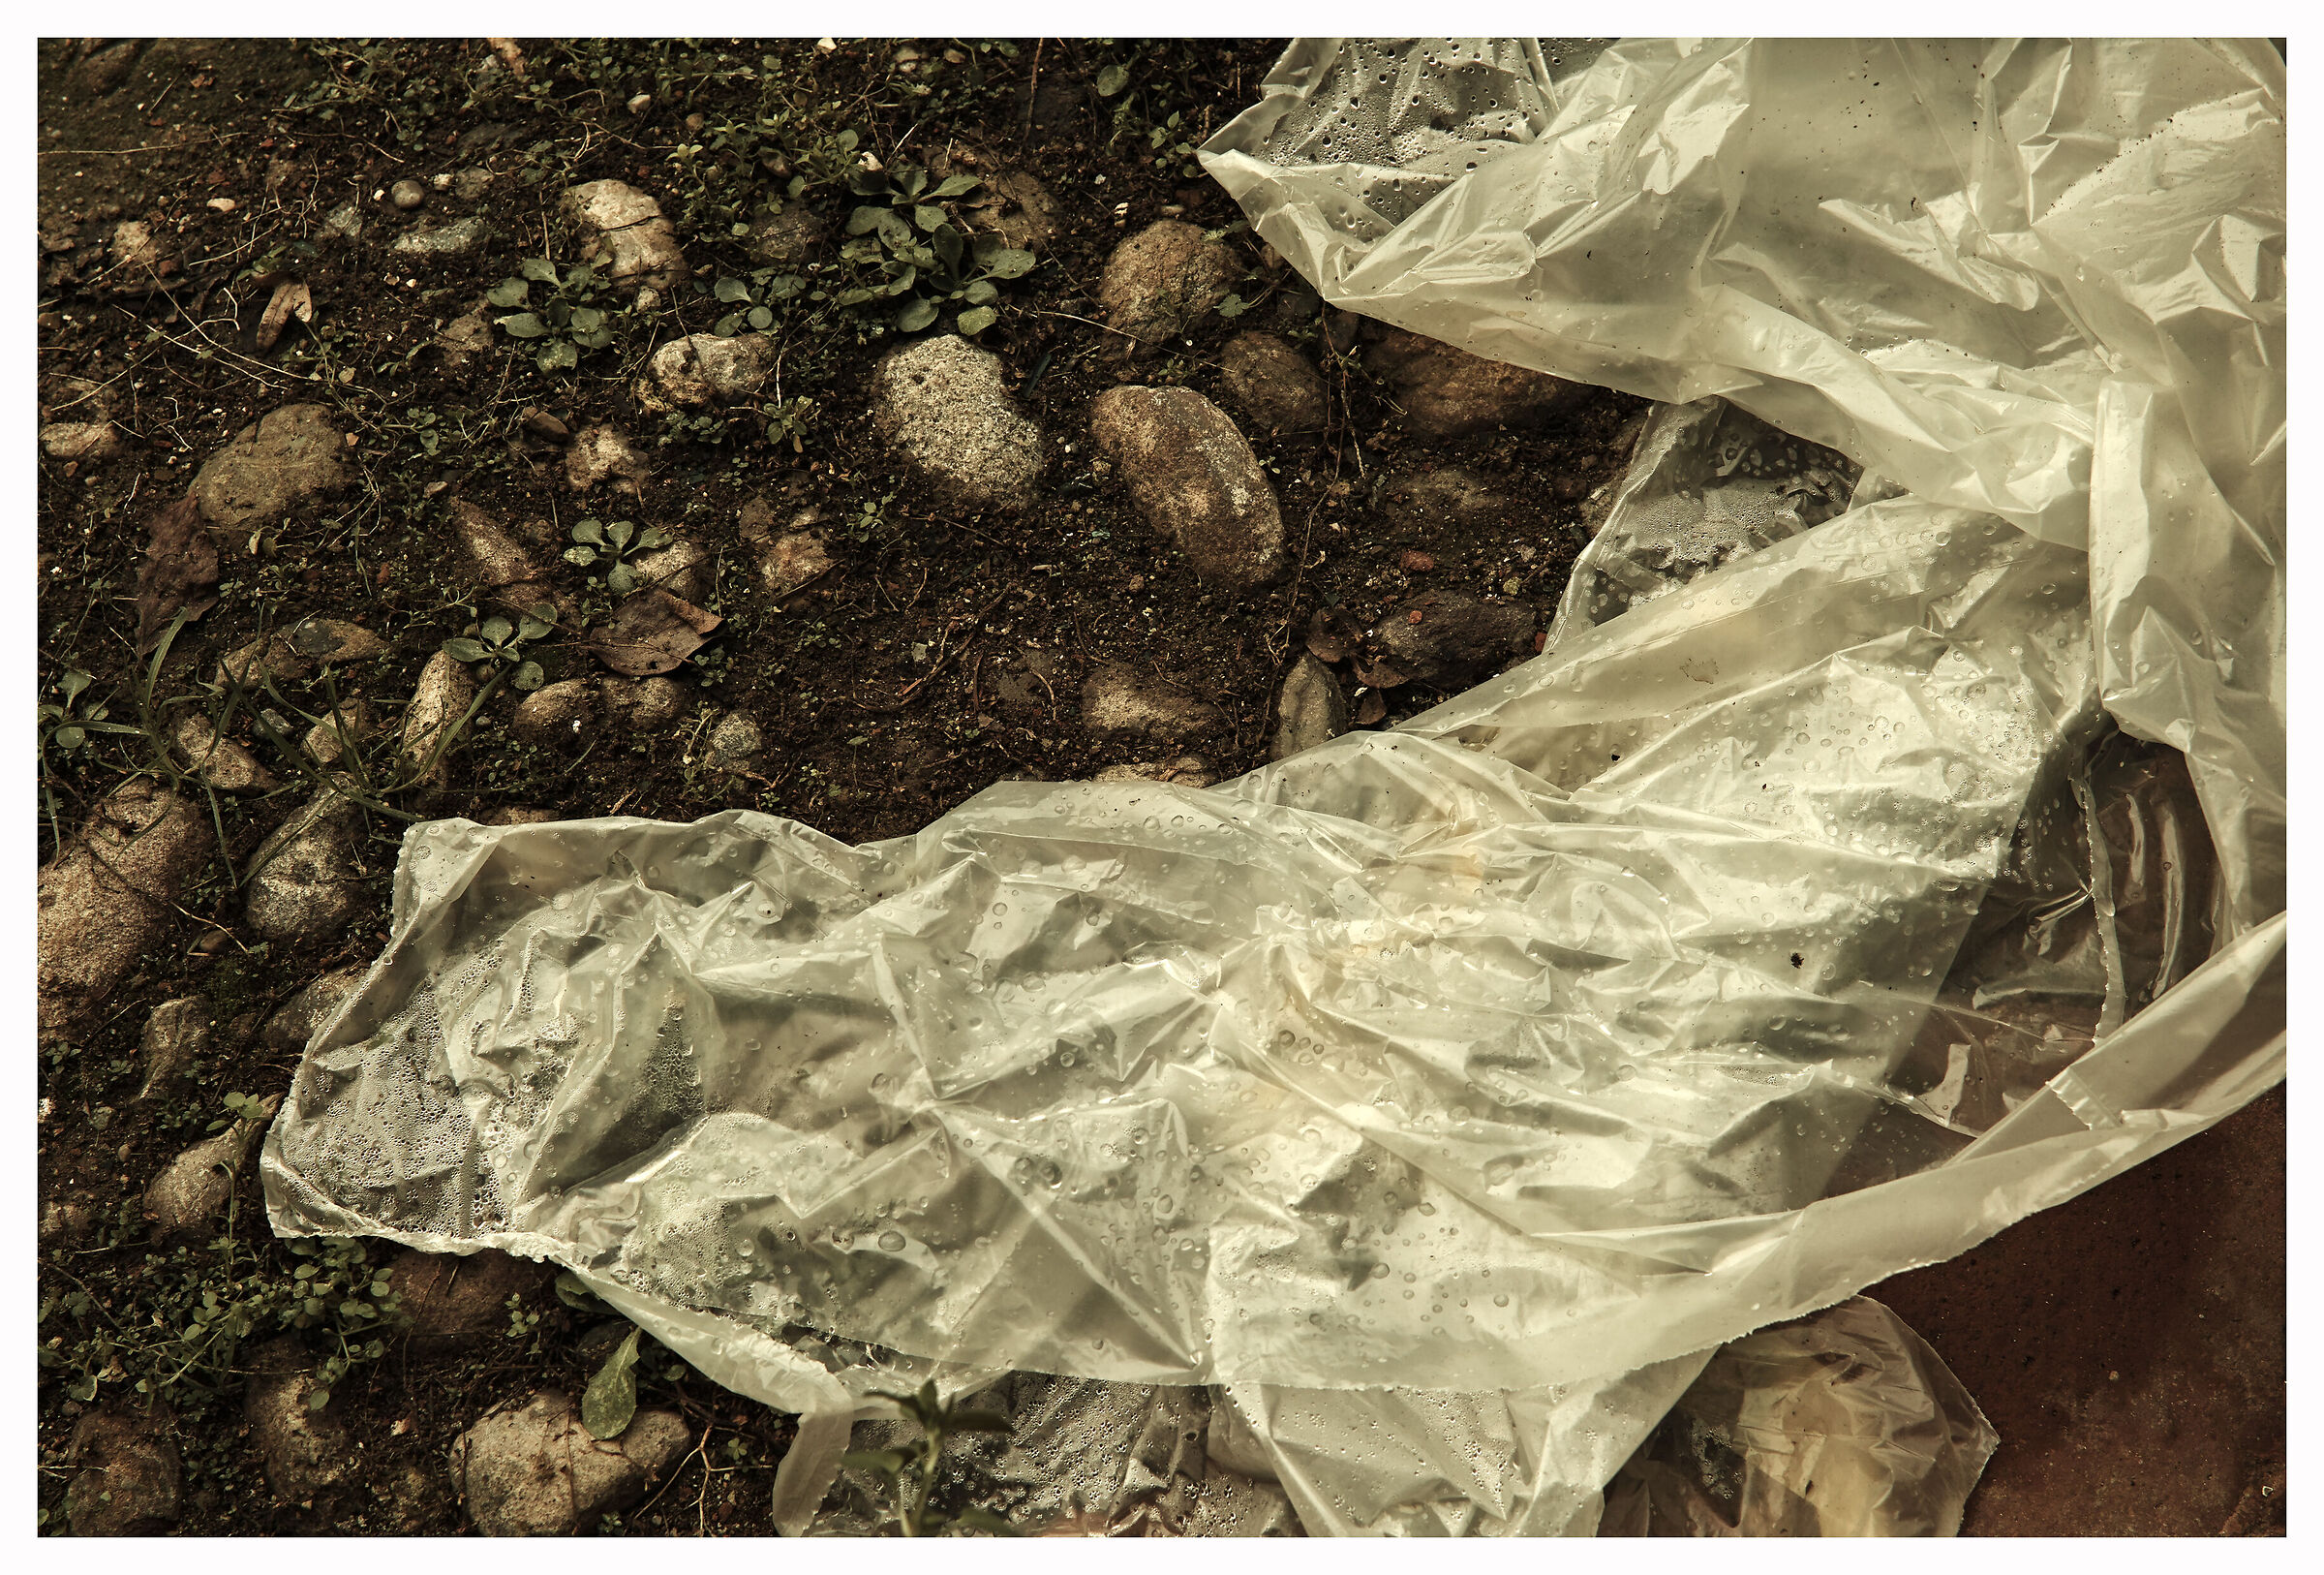 Wrapped in plastic (tribute to David Lynch)...